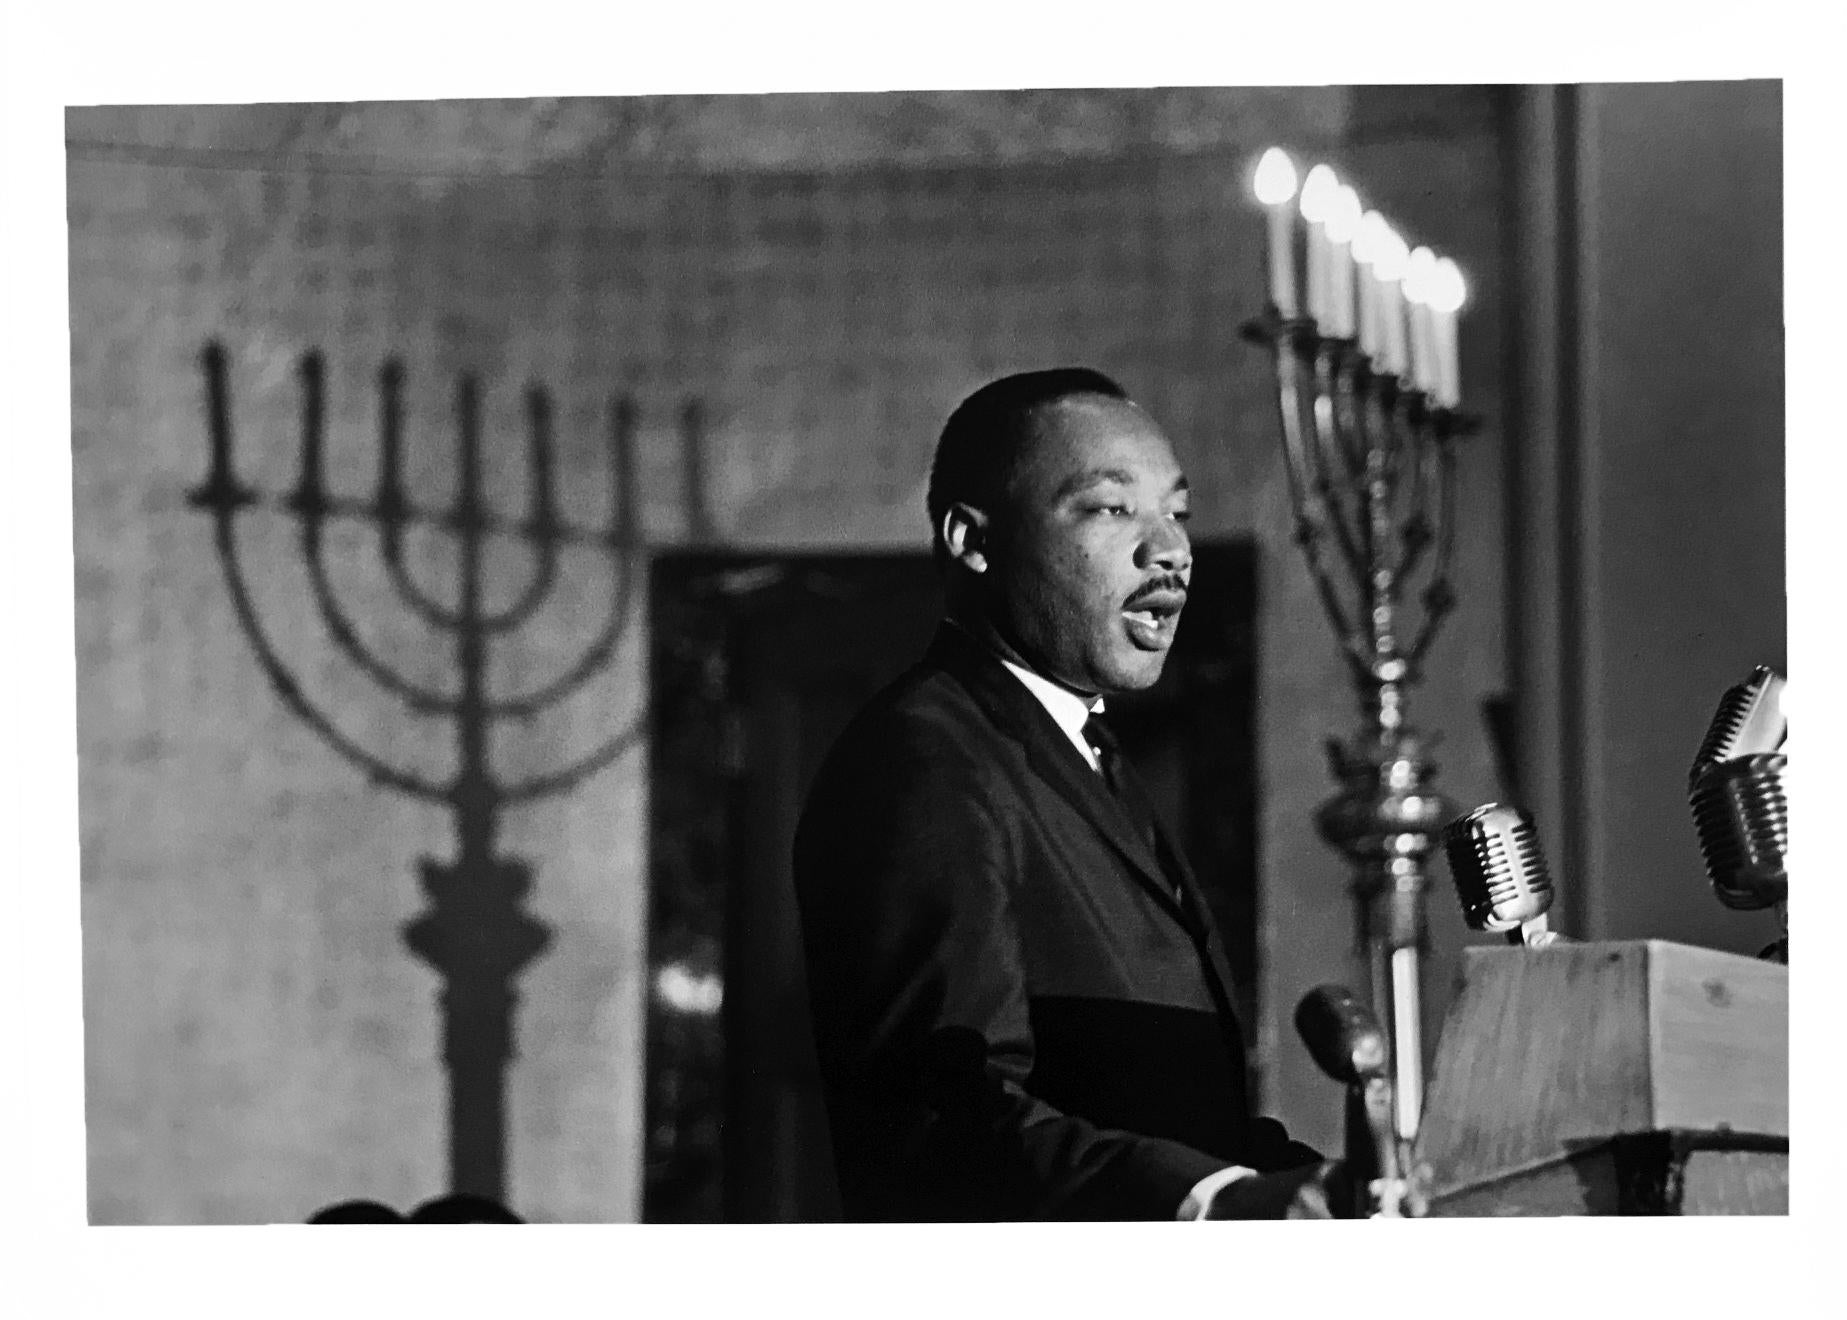 Leonard Freed Black and White Photograph - Martin Luther King, Black and White Documentary MLK Civil Rights Photography